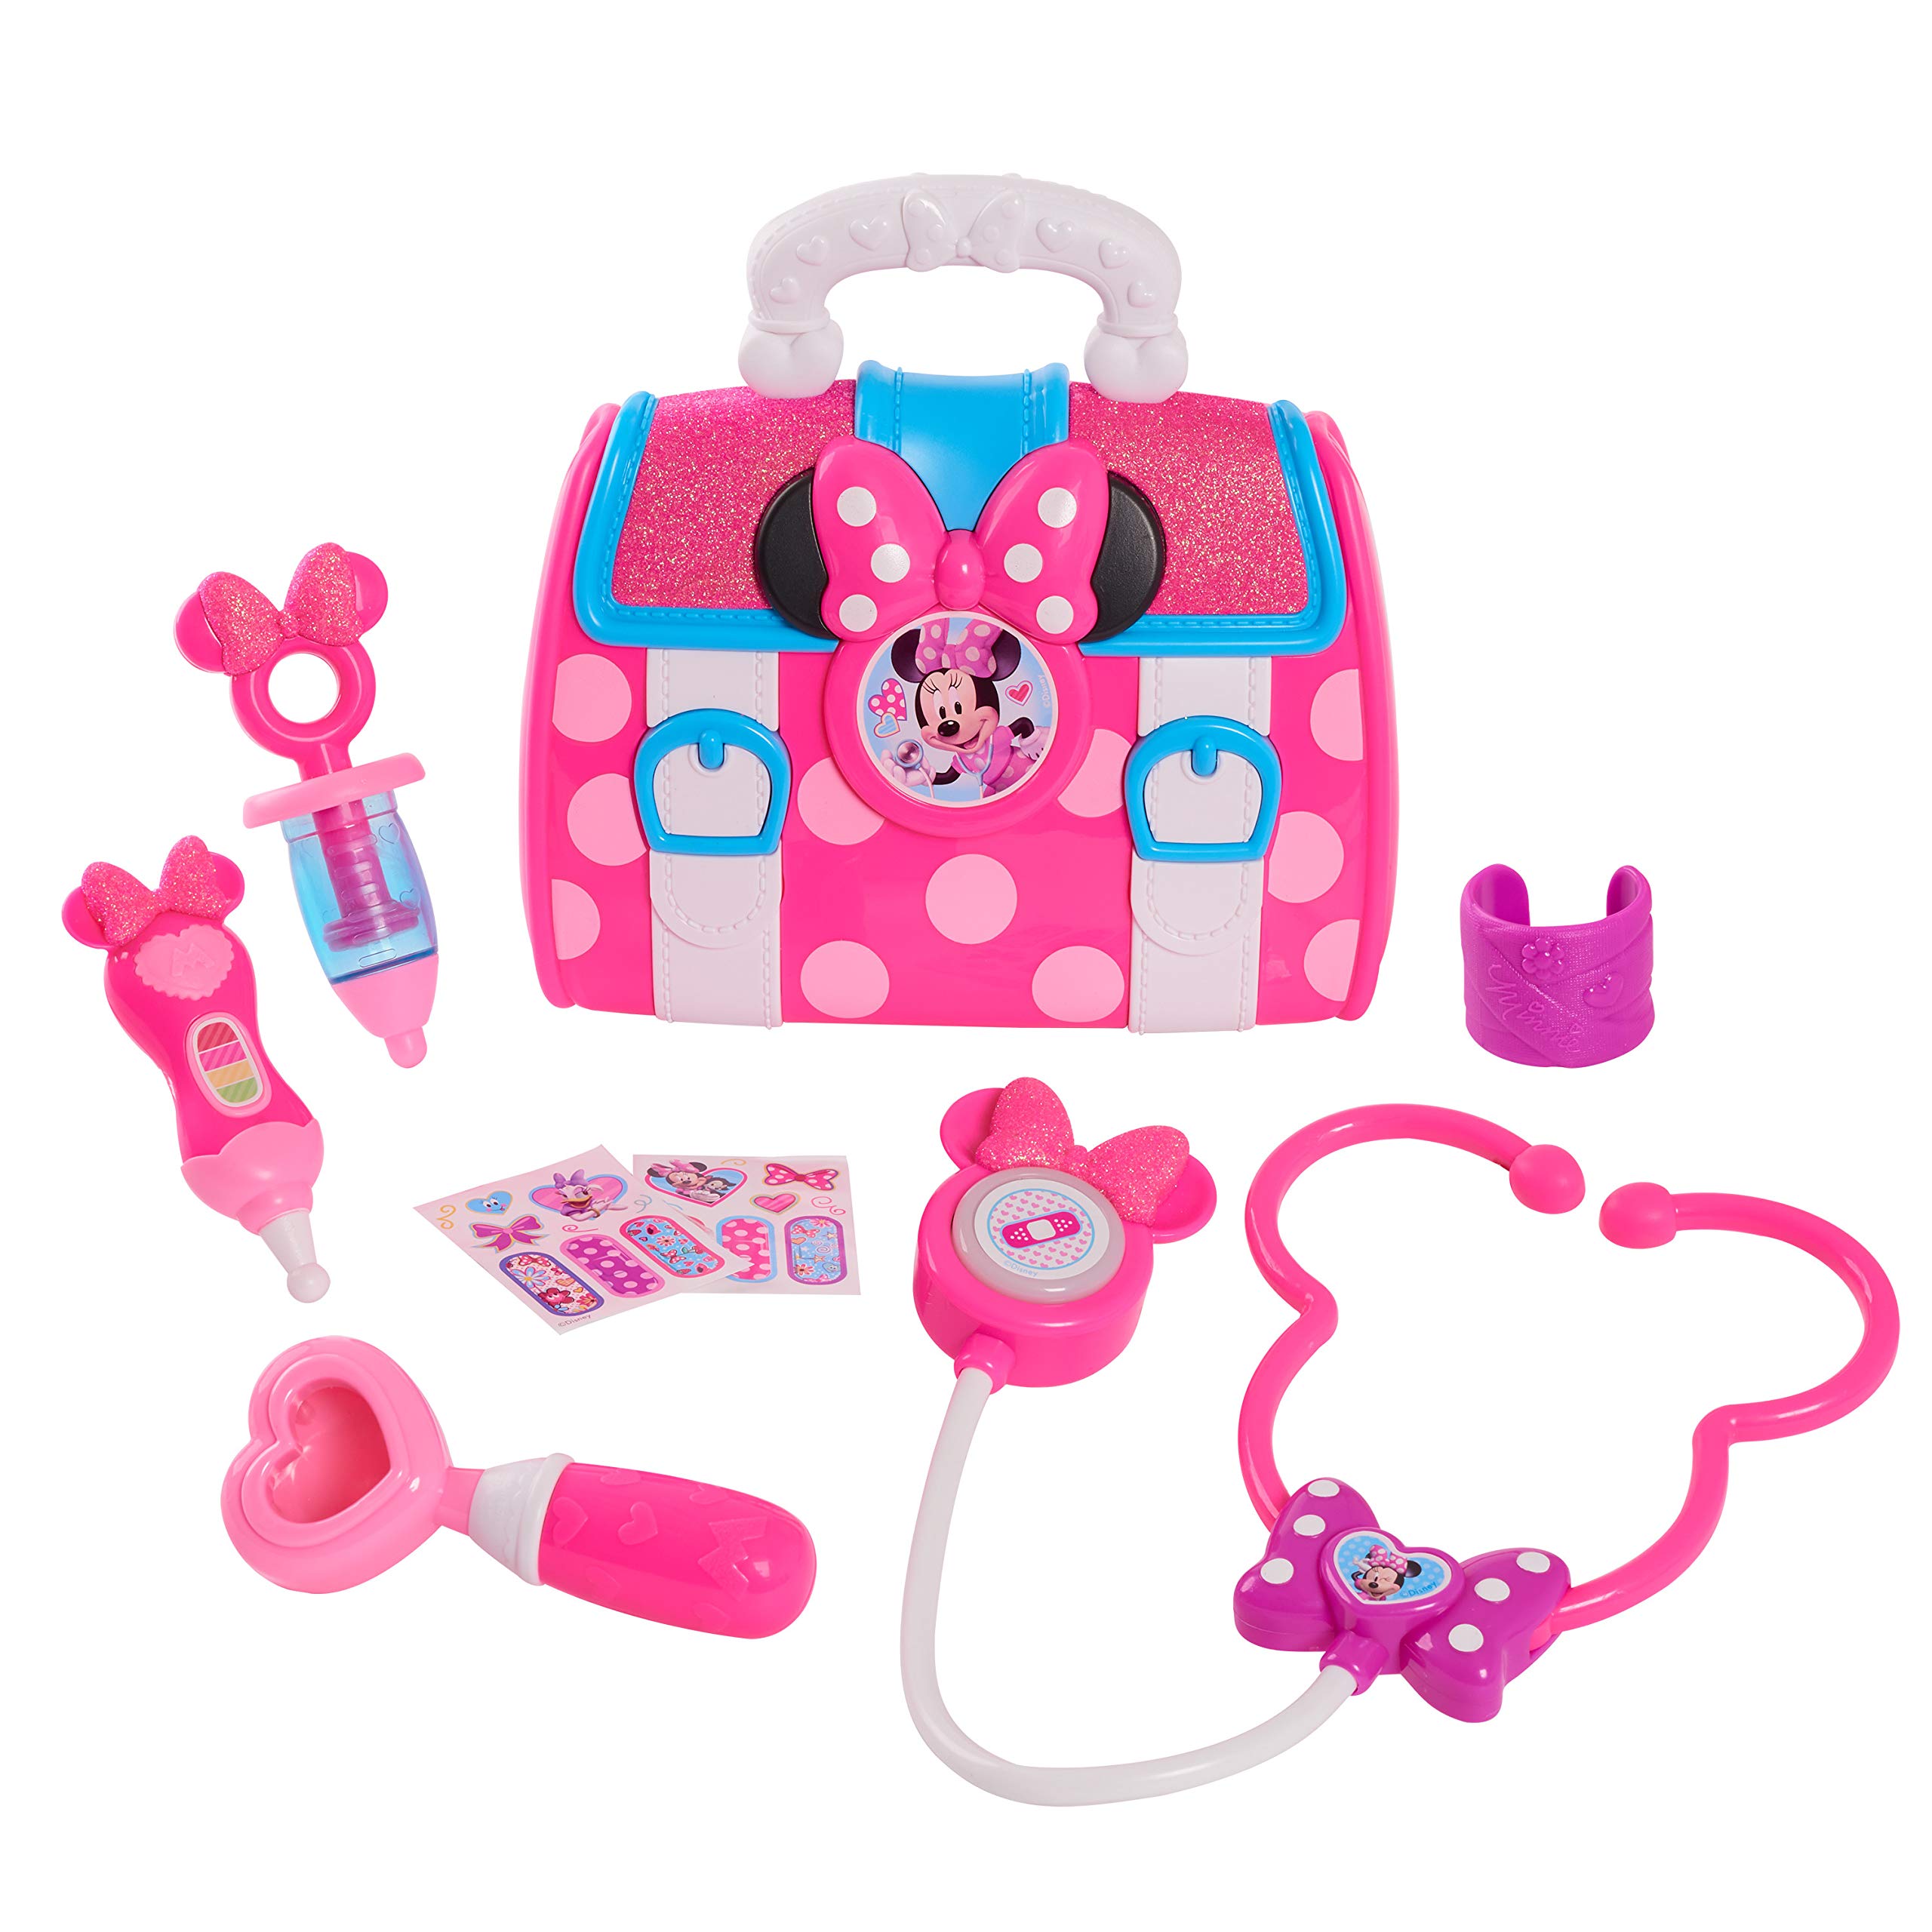 Disney Junior’s Minnie Mouse Bow-Care Doctor Bag Set, Dress Up and Pretend Play, Kids Toys for Ages 3 Up, Gifts and Presents by Just Play